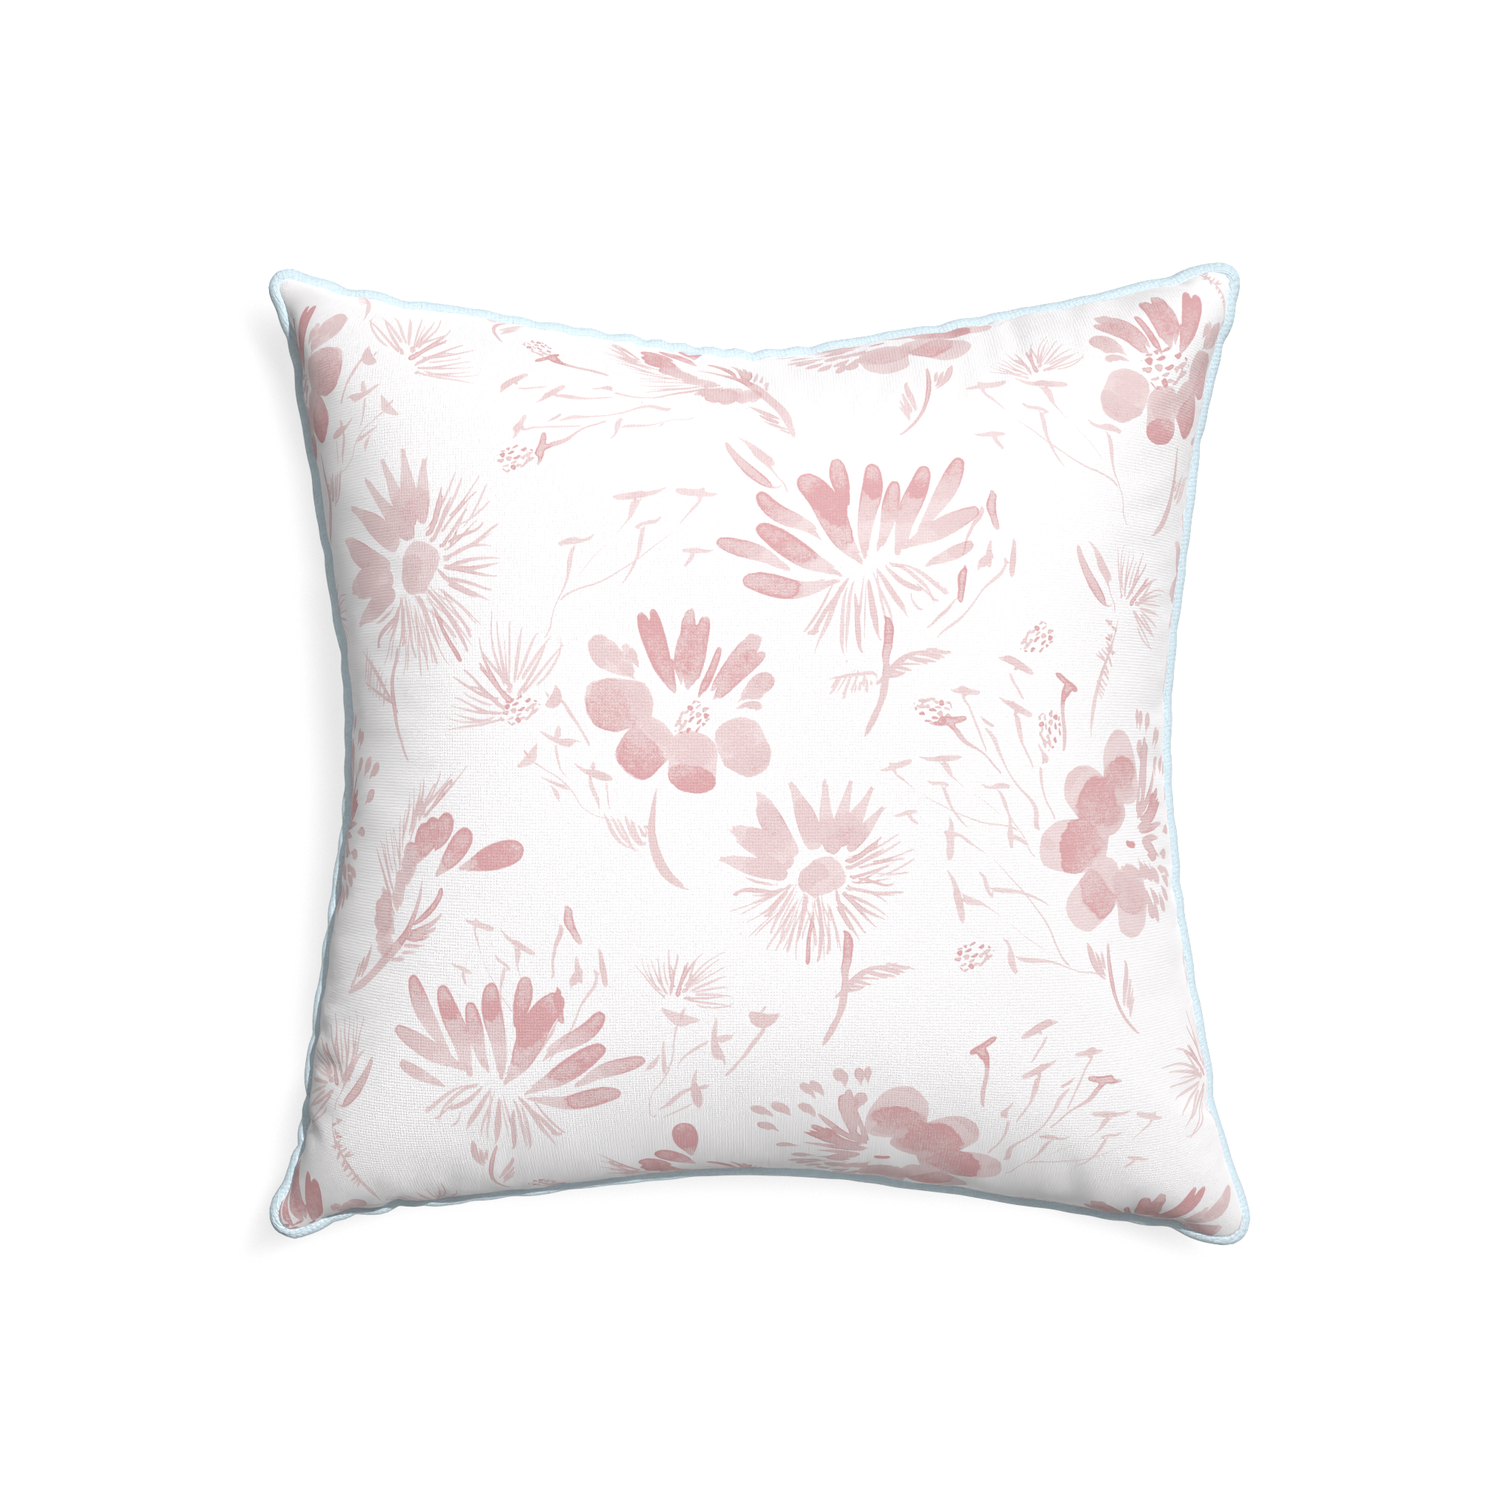 22-square blake custom pillow with powder piping on white background